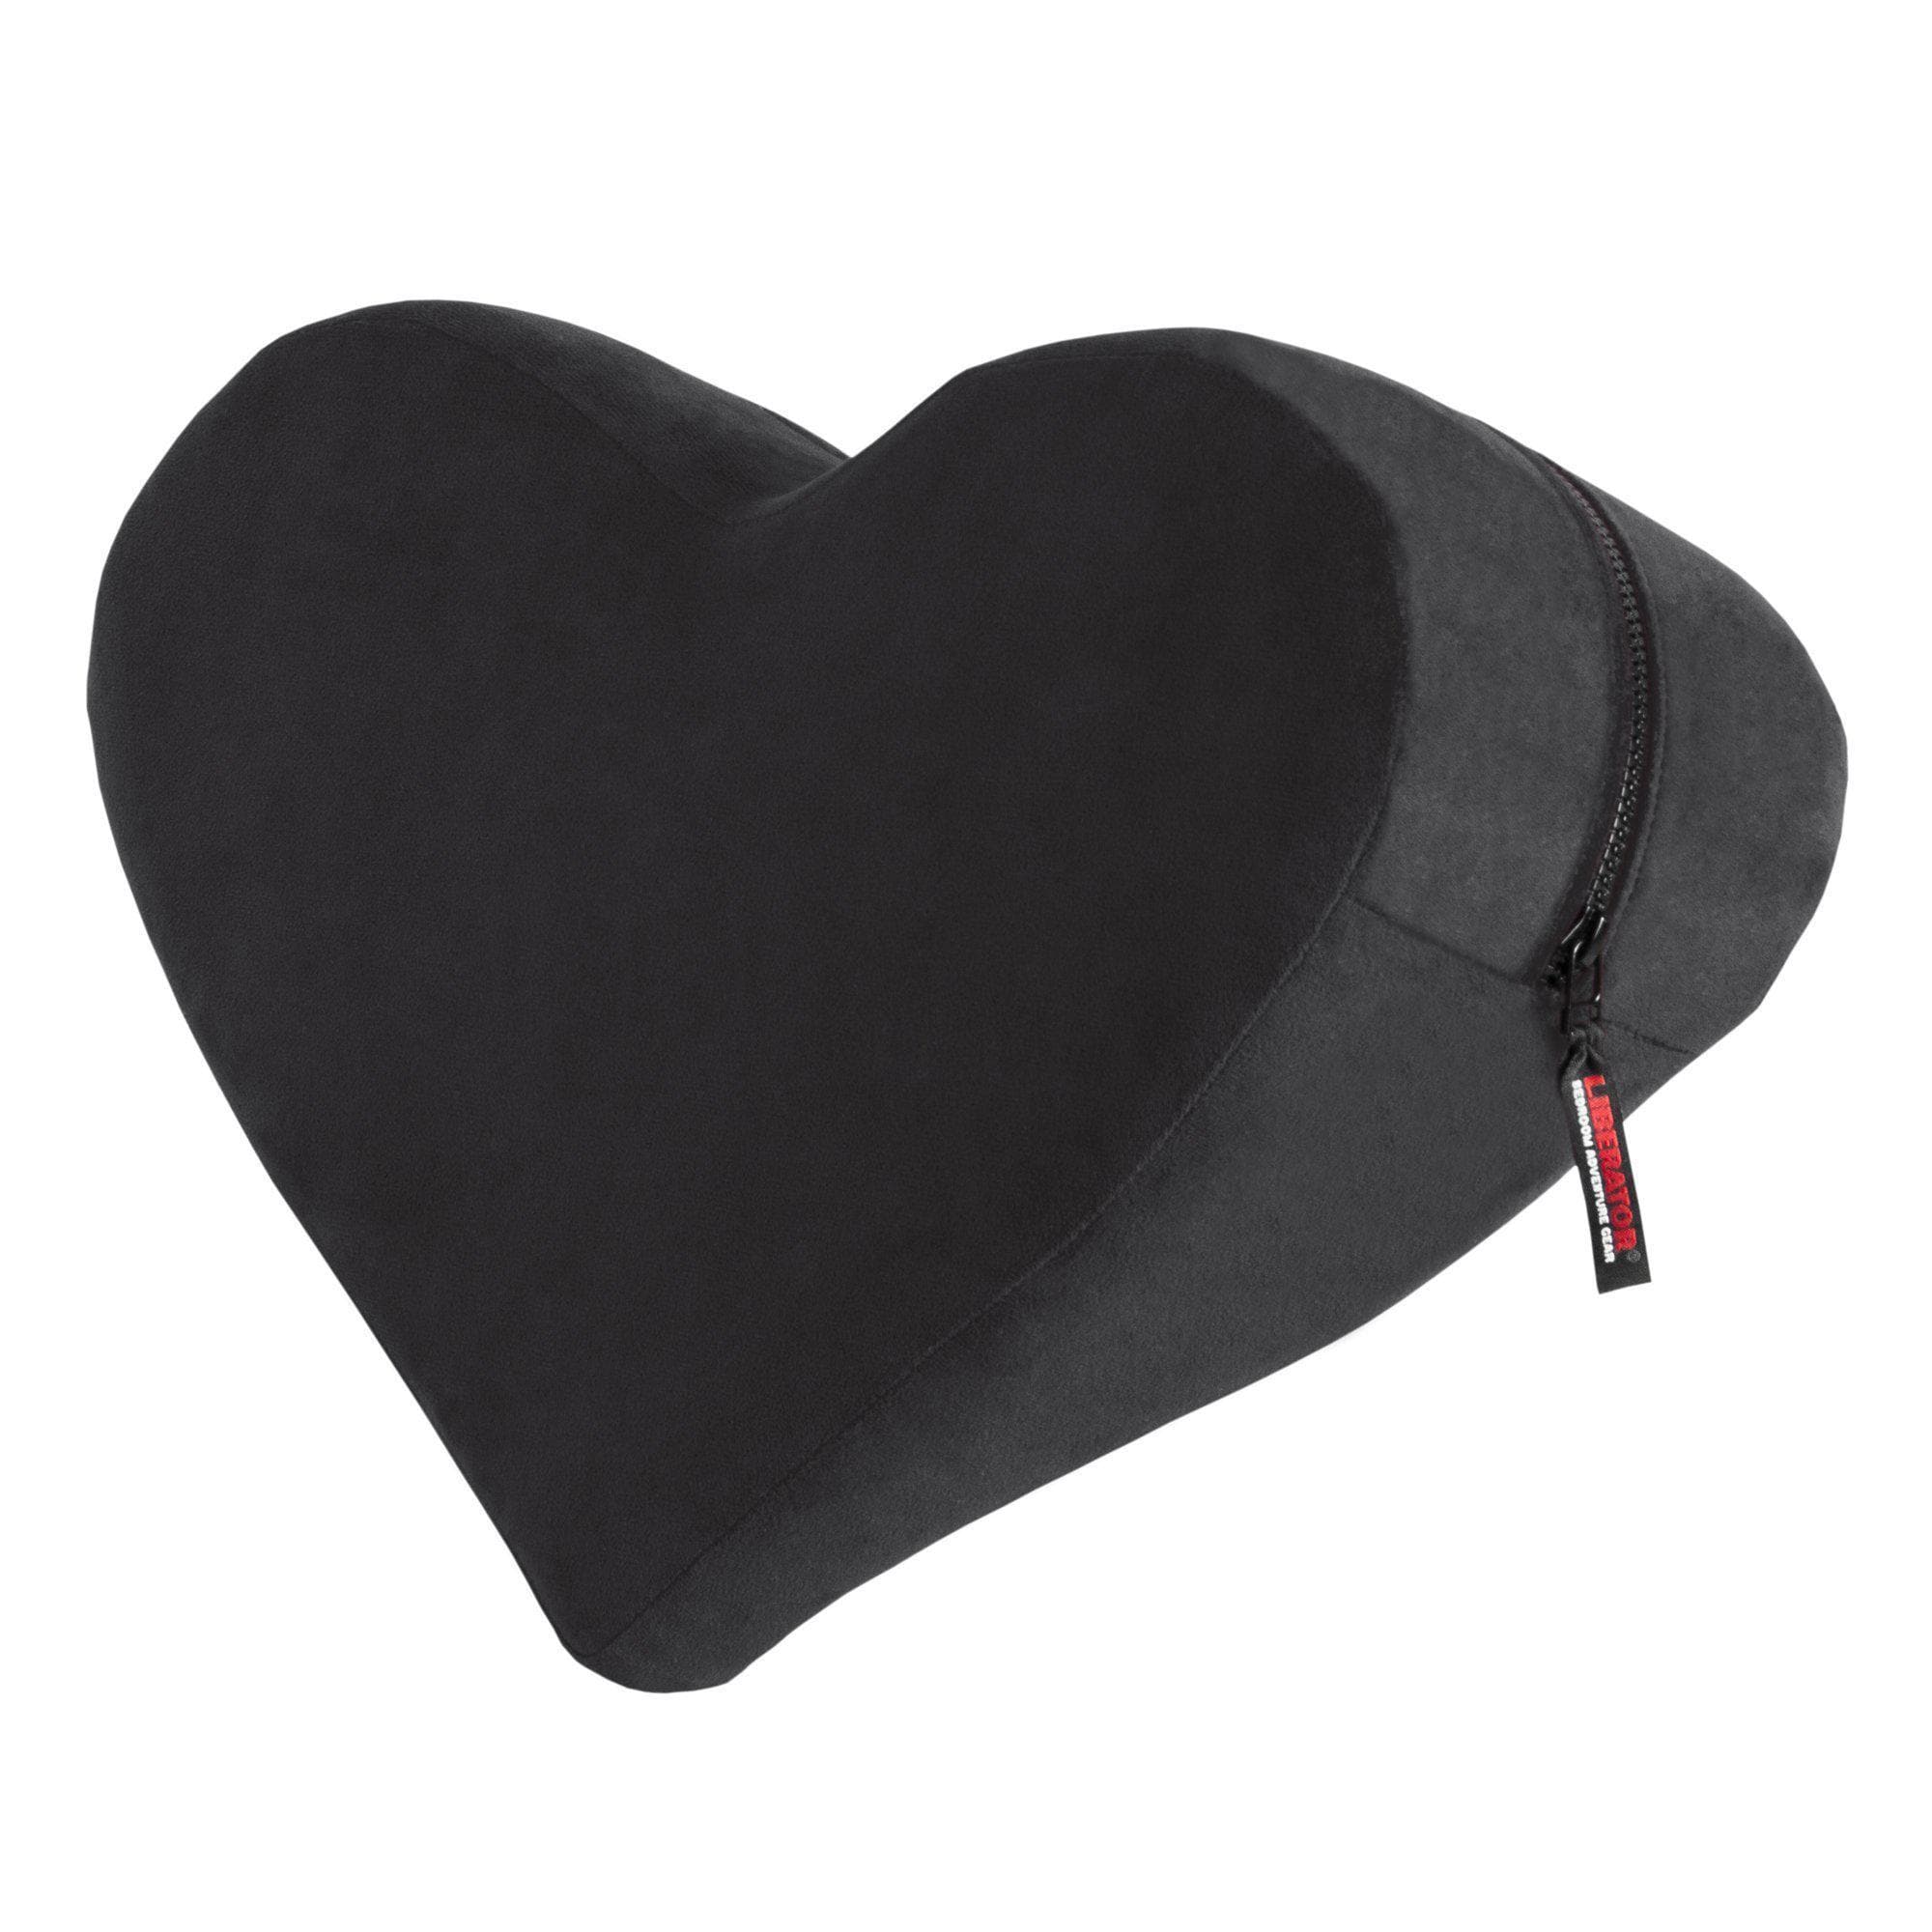 Liberator Heart Wedge Pillow Inclined Couples Sex Position Aid for G Spot Positioning - Romantic Blessings